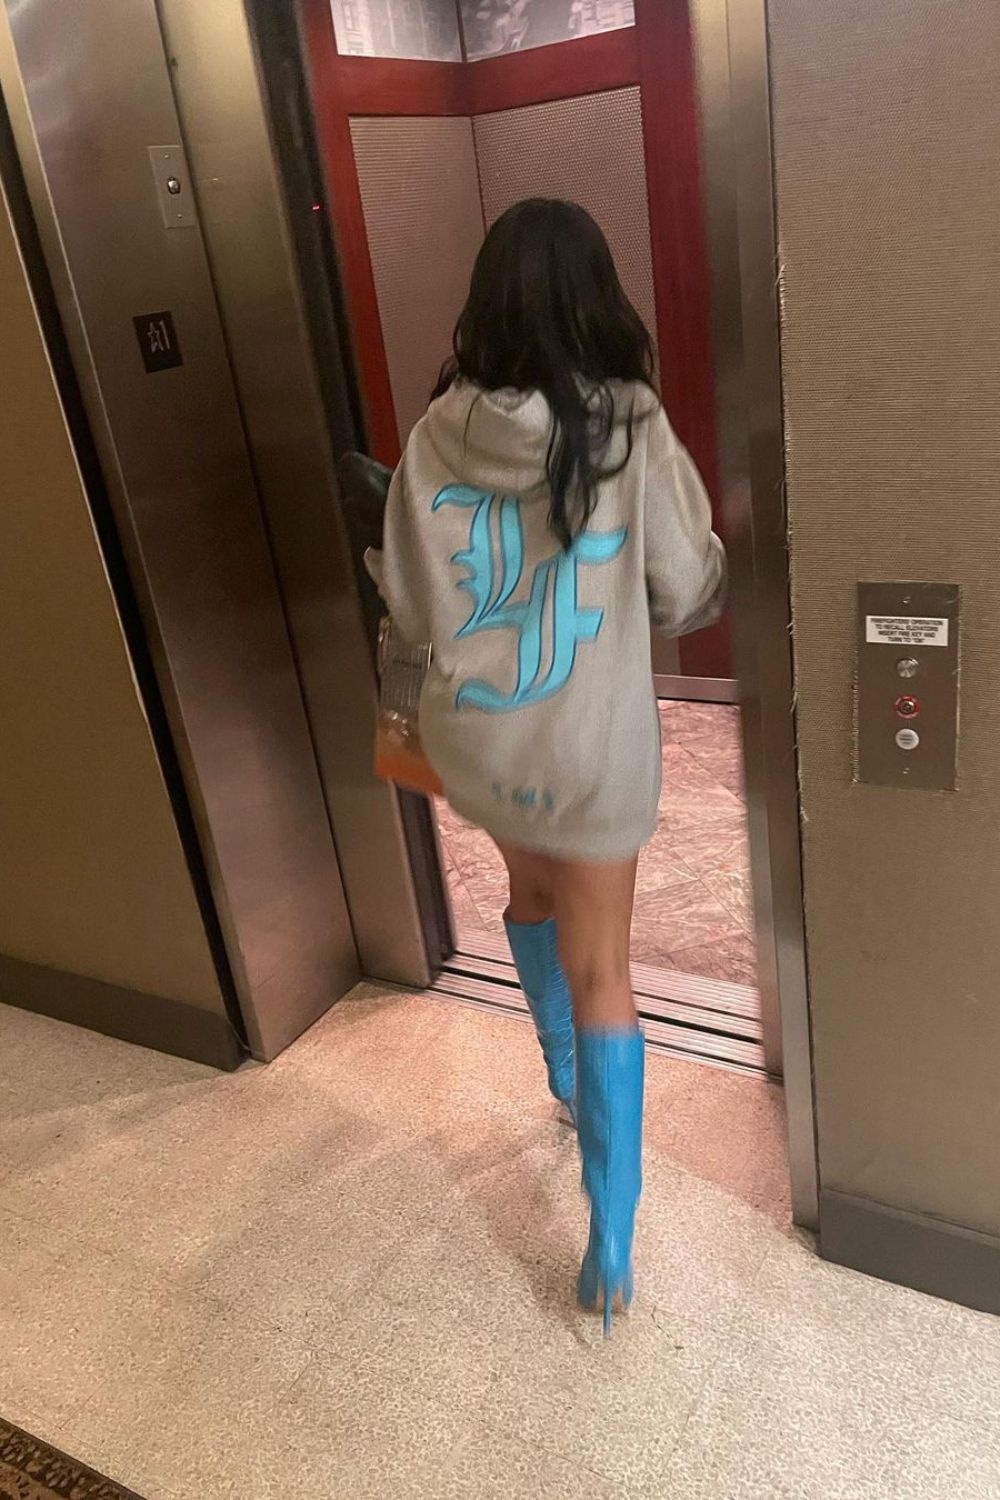 Ana Montana Promoting LaMelo's Hoodie; The Picture Shared By LaMelo on His Instagram 